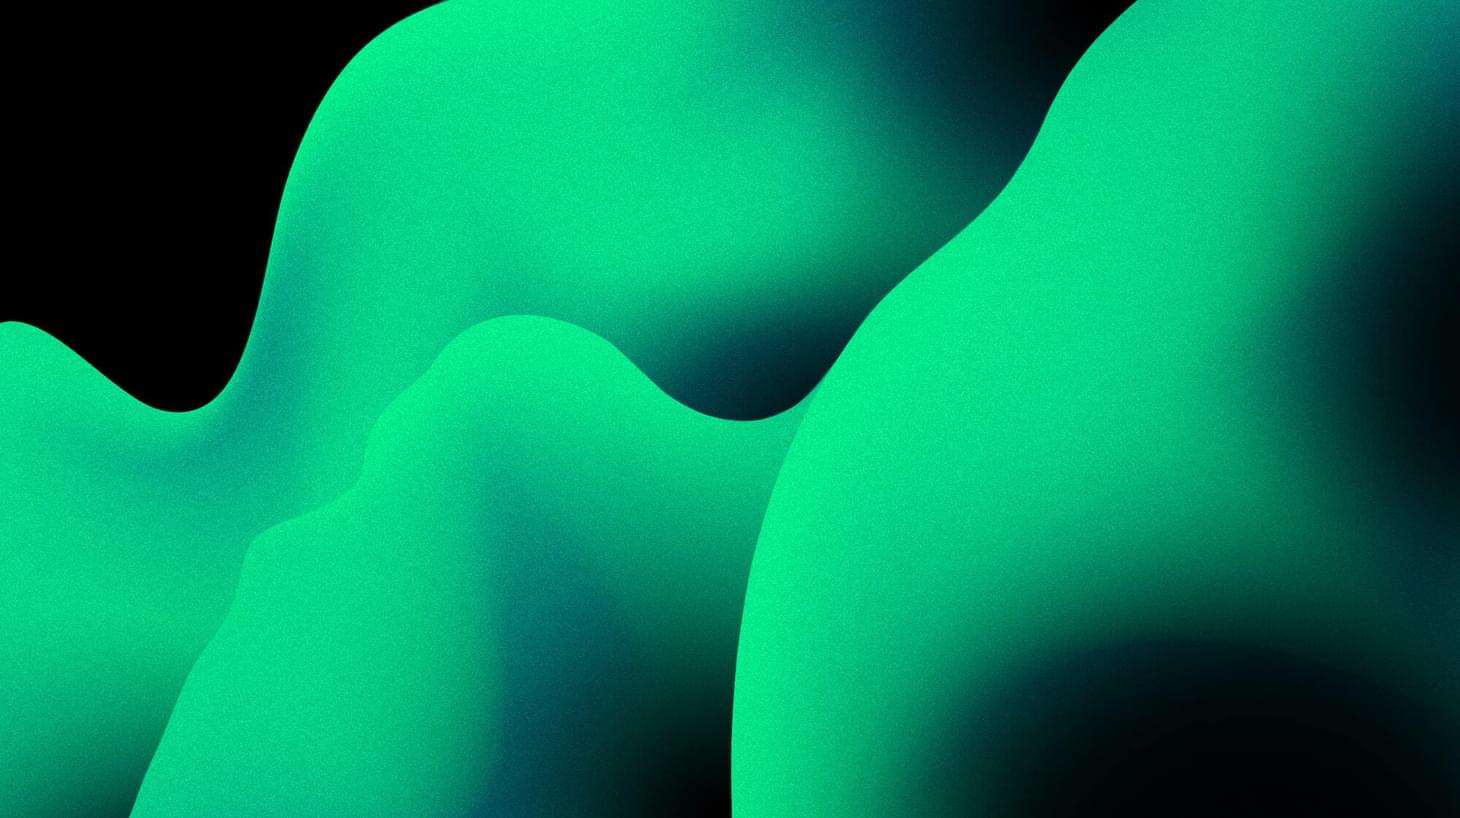 A textural image, green waves on black